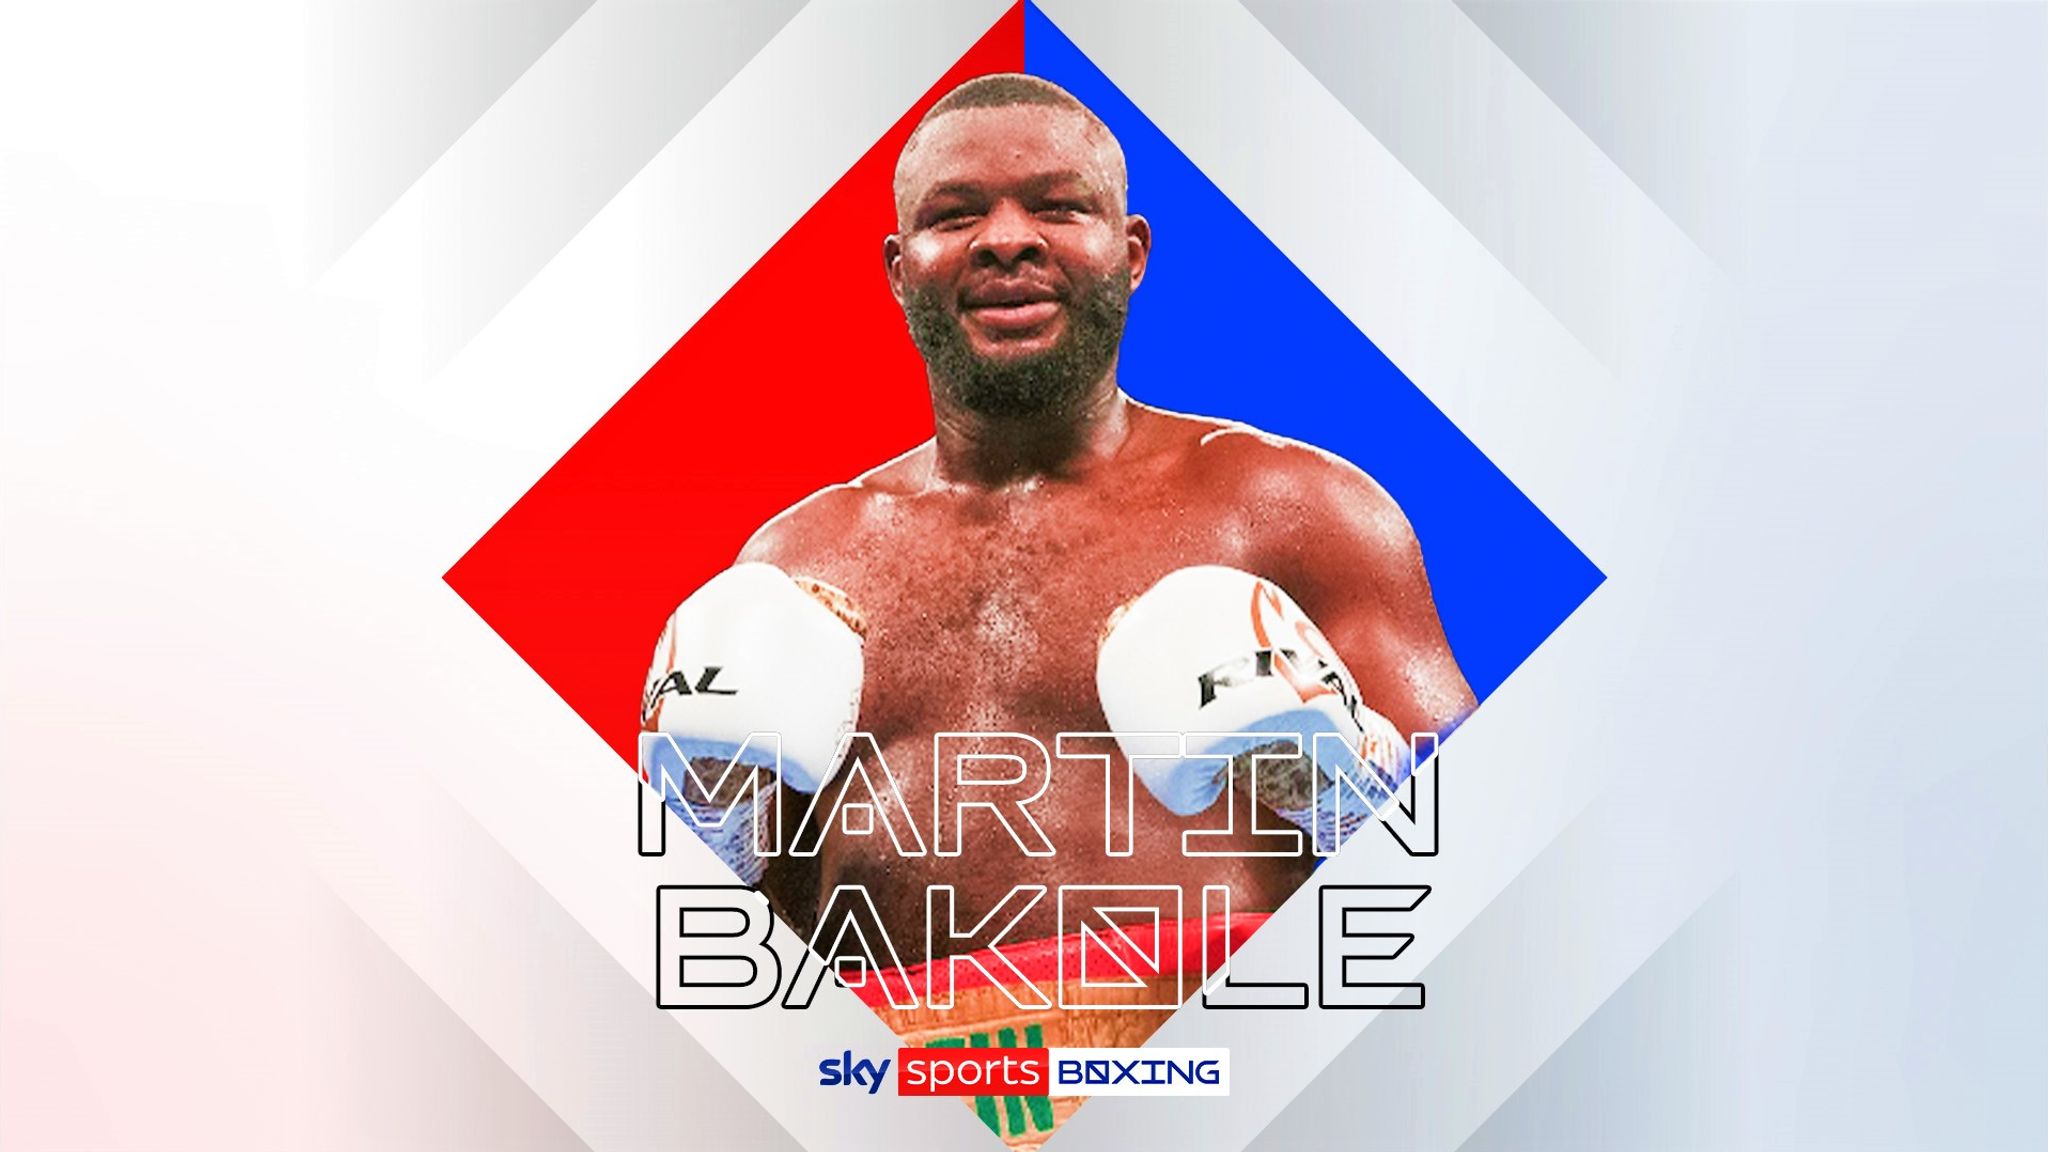 Martin Bakole signs multifight deal with BOXXER and hopes to secure world heavyweight title